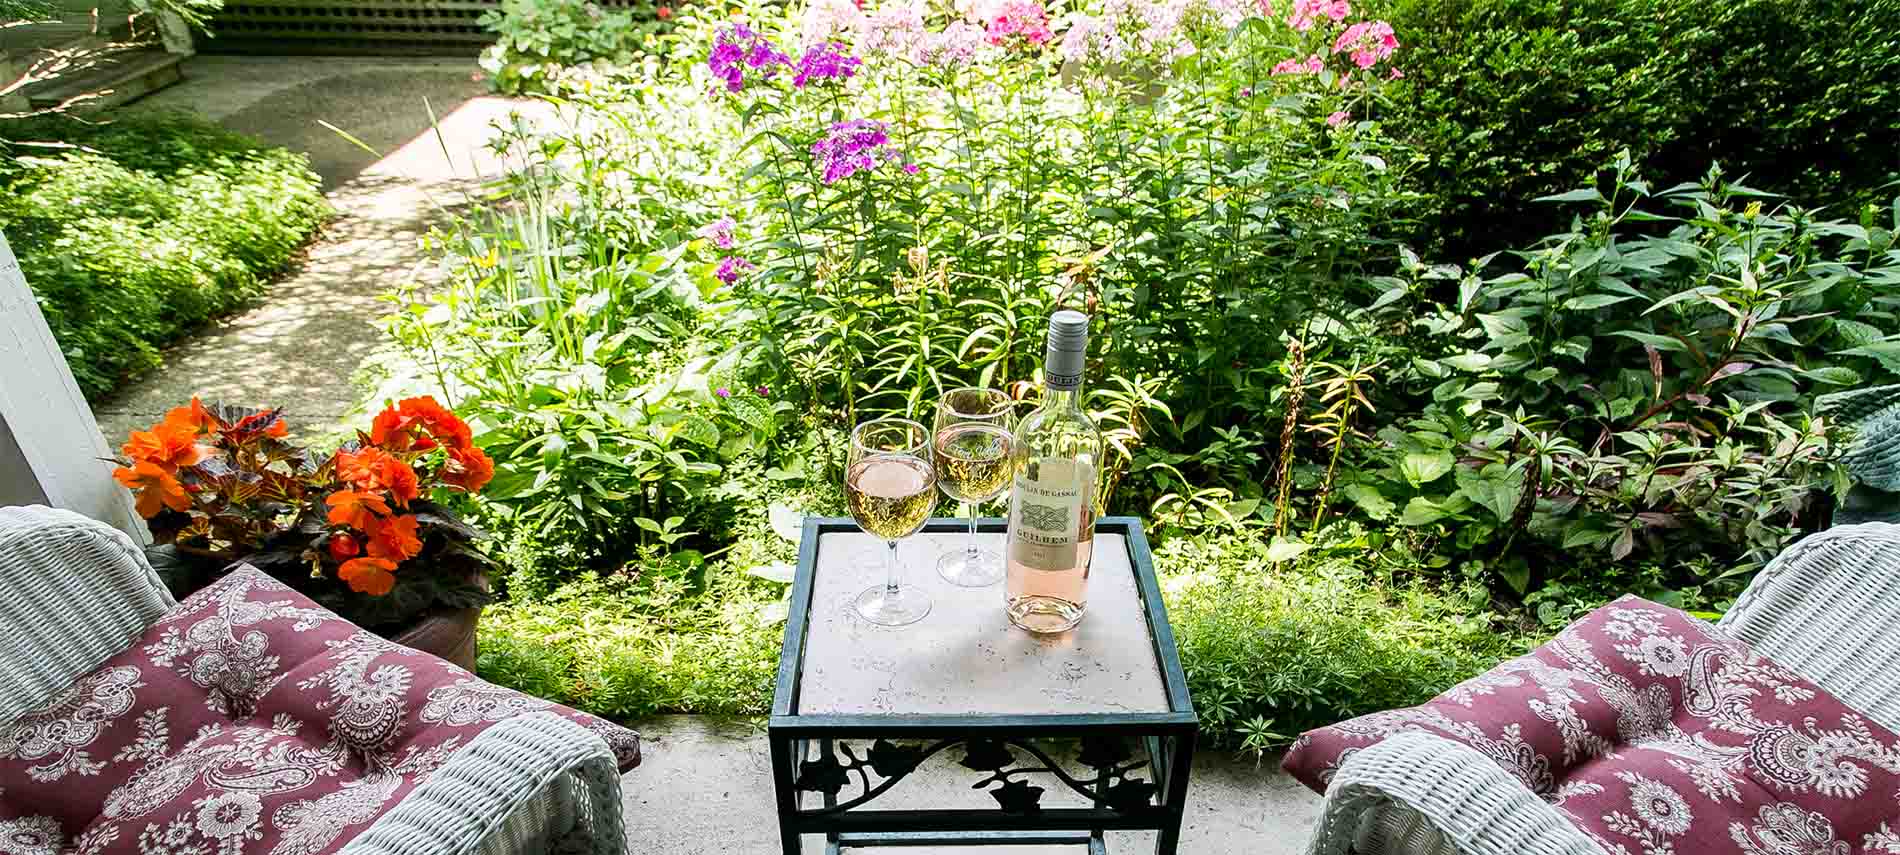 Table with two wine glasses and bottle of pink wine. Wicker chairs sitting next to it.